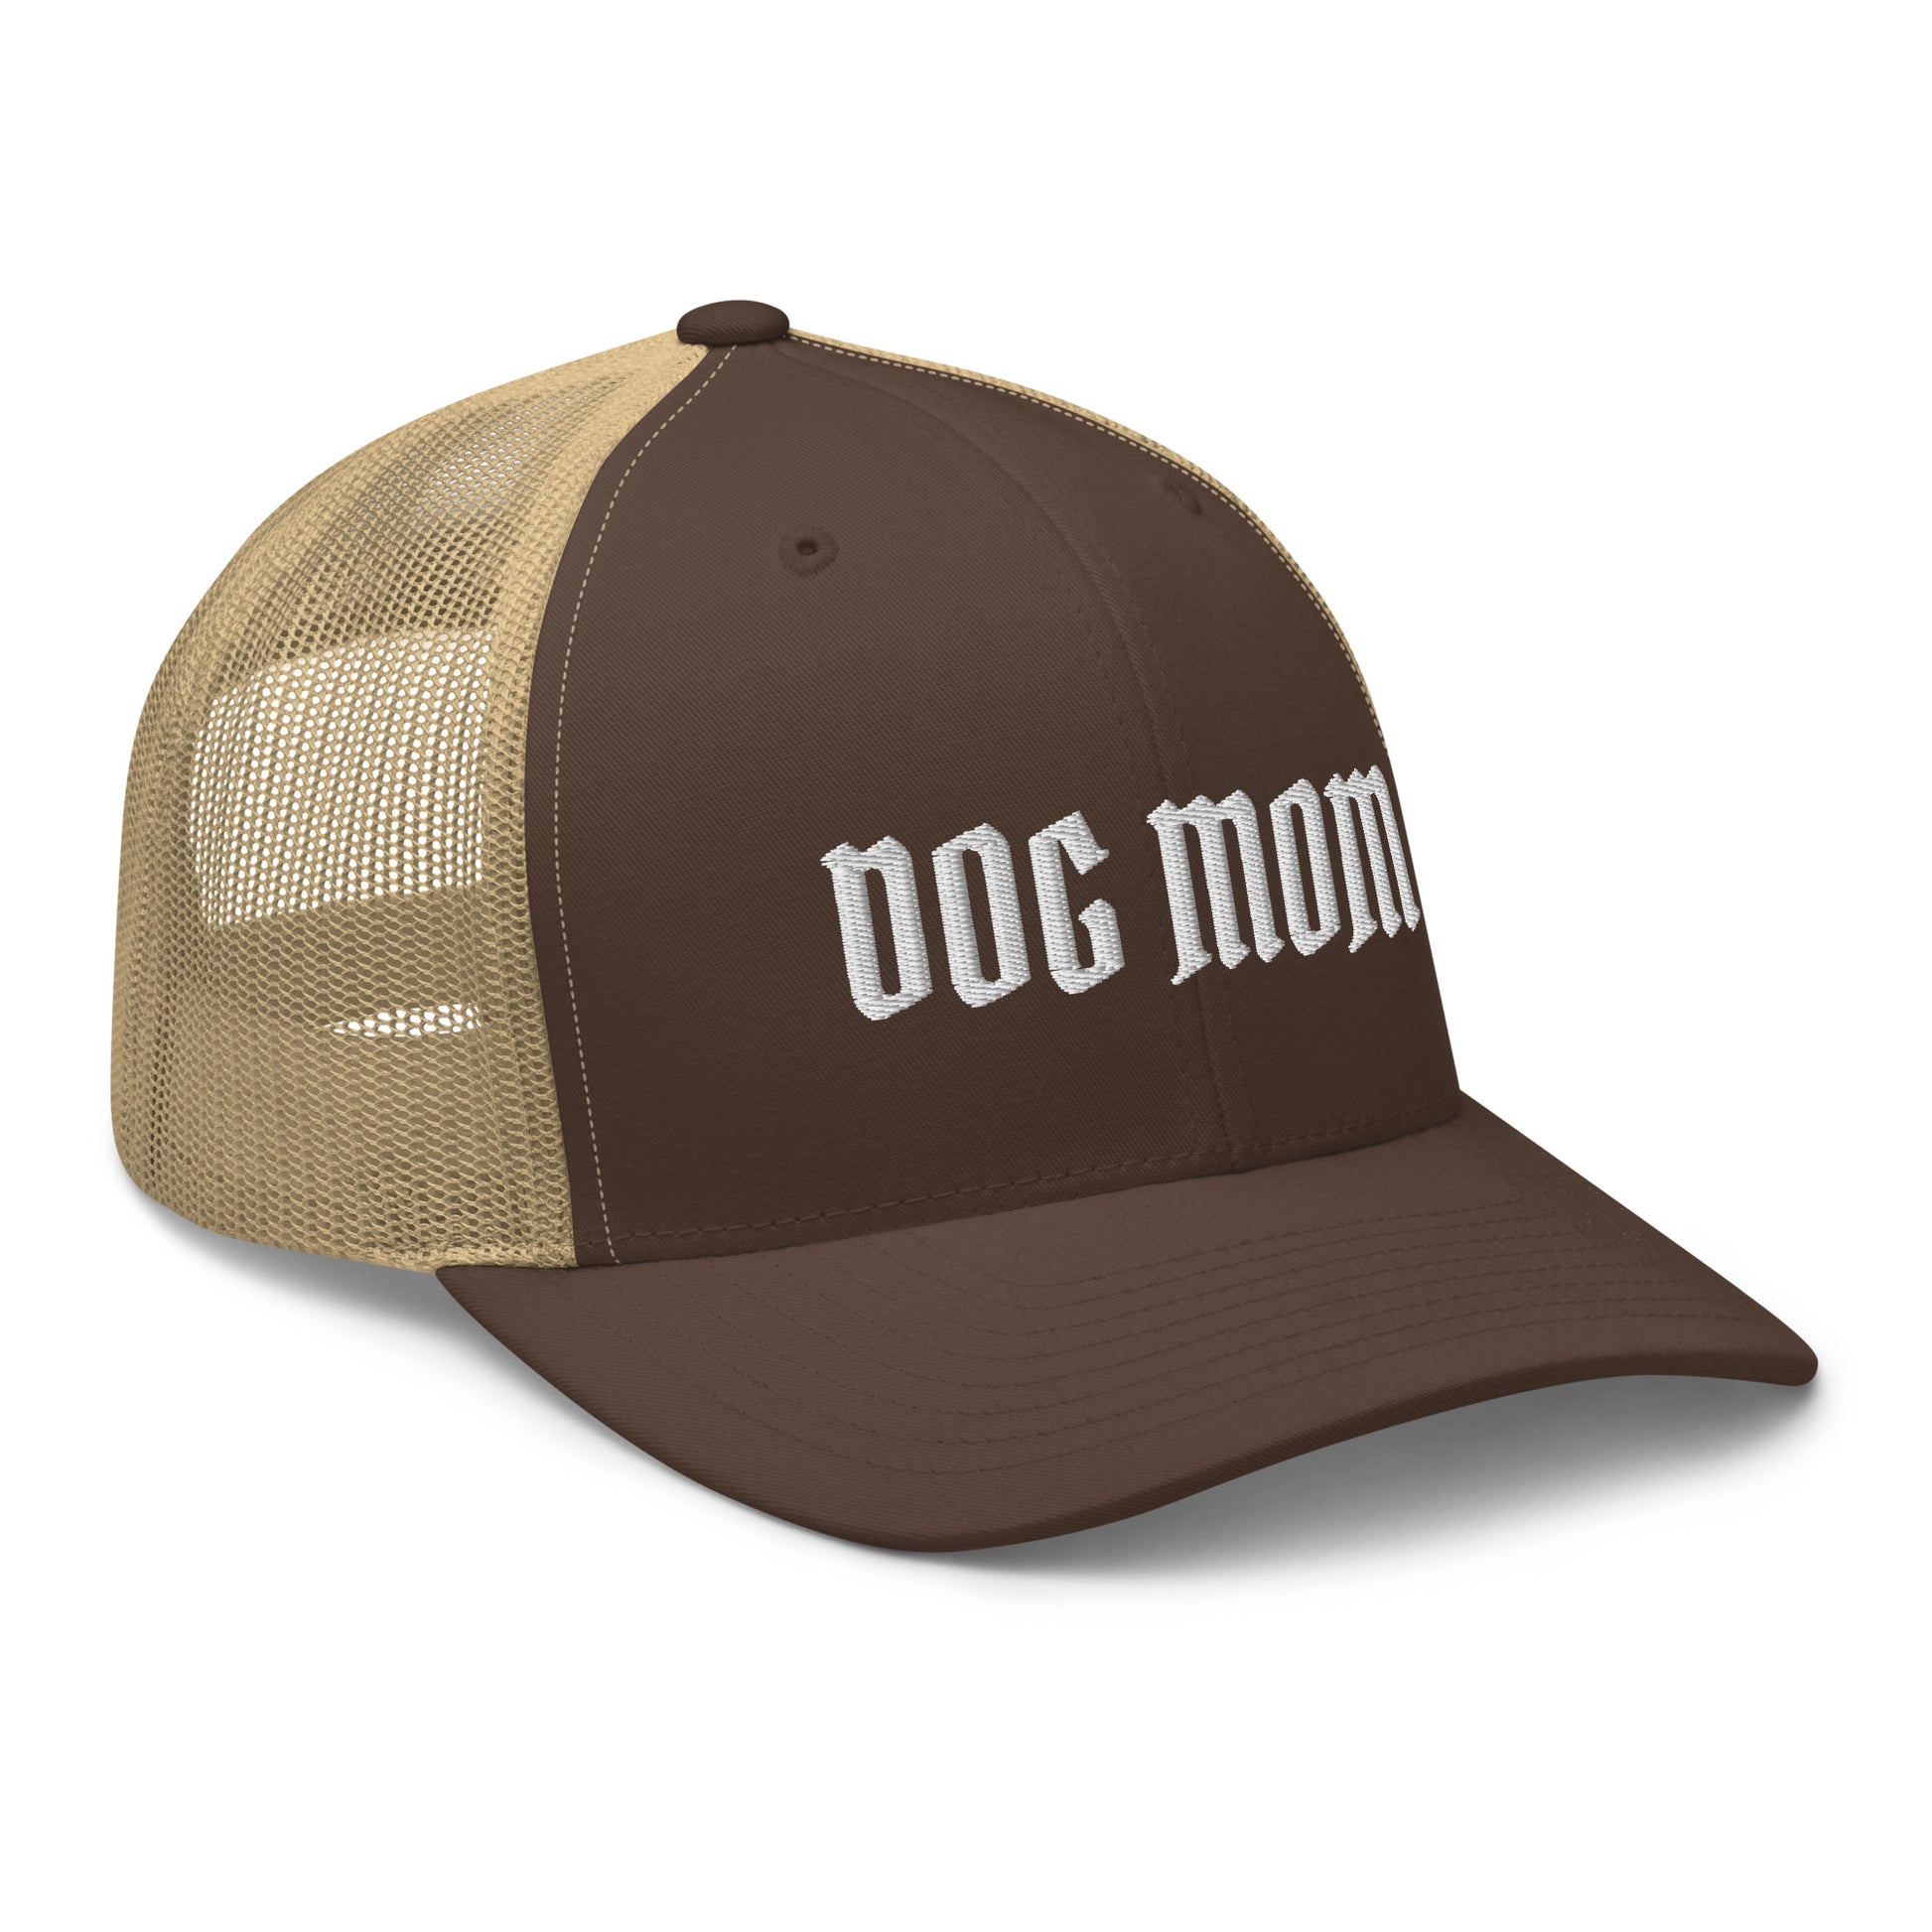 Dog mom trucker hat made for German Shepherd lovers and owners, brown color - GSD Colony